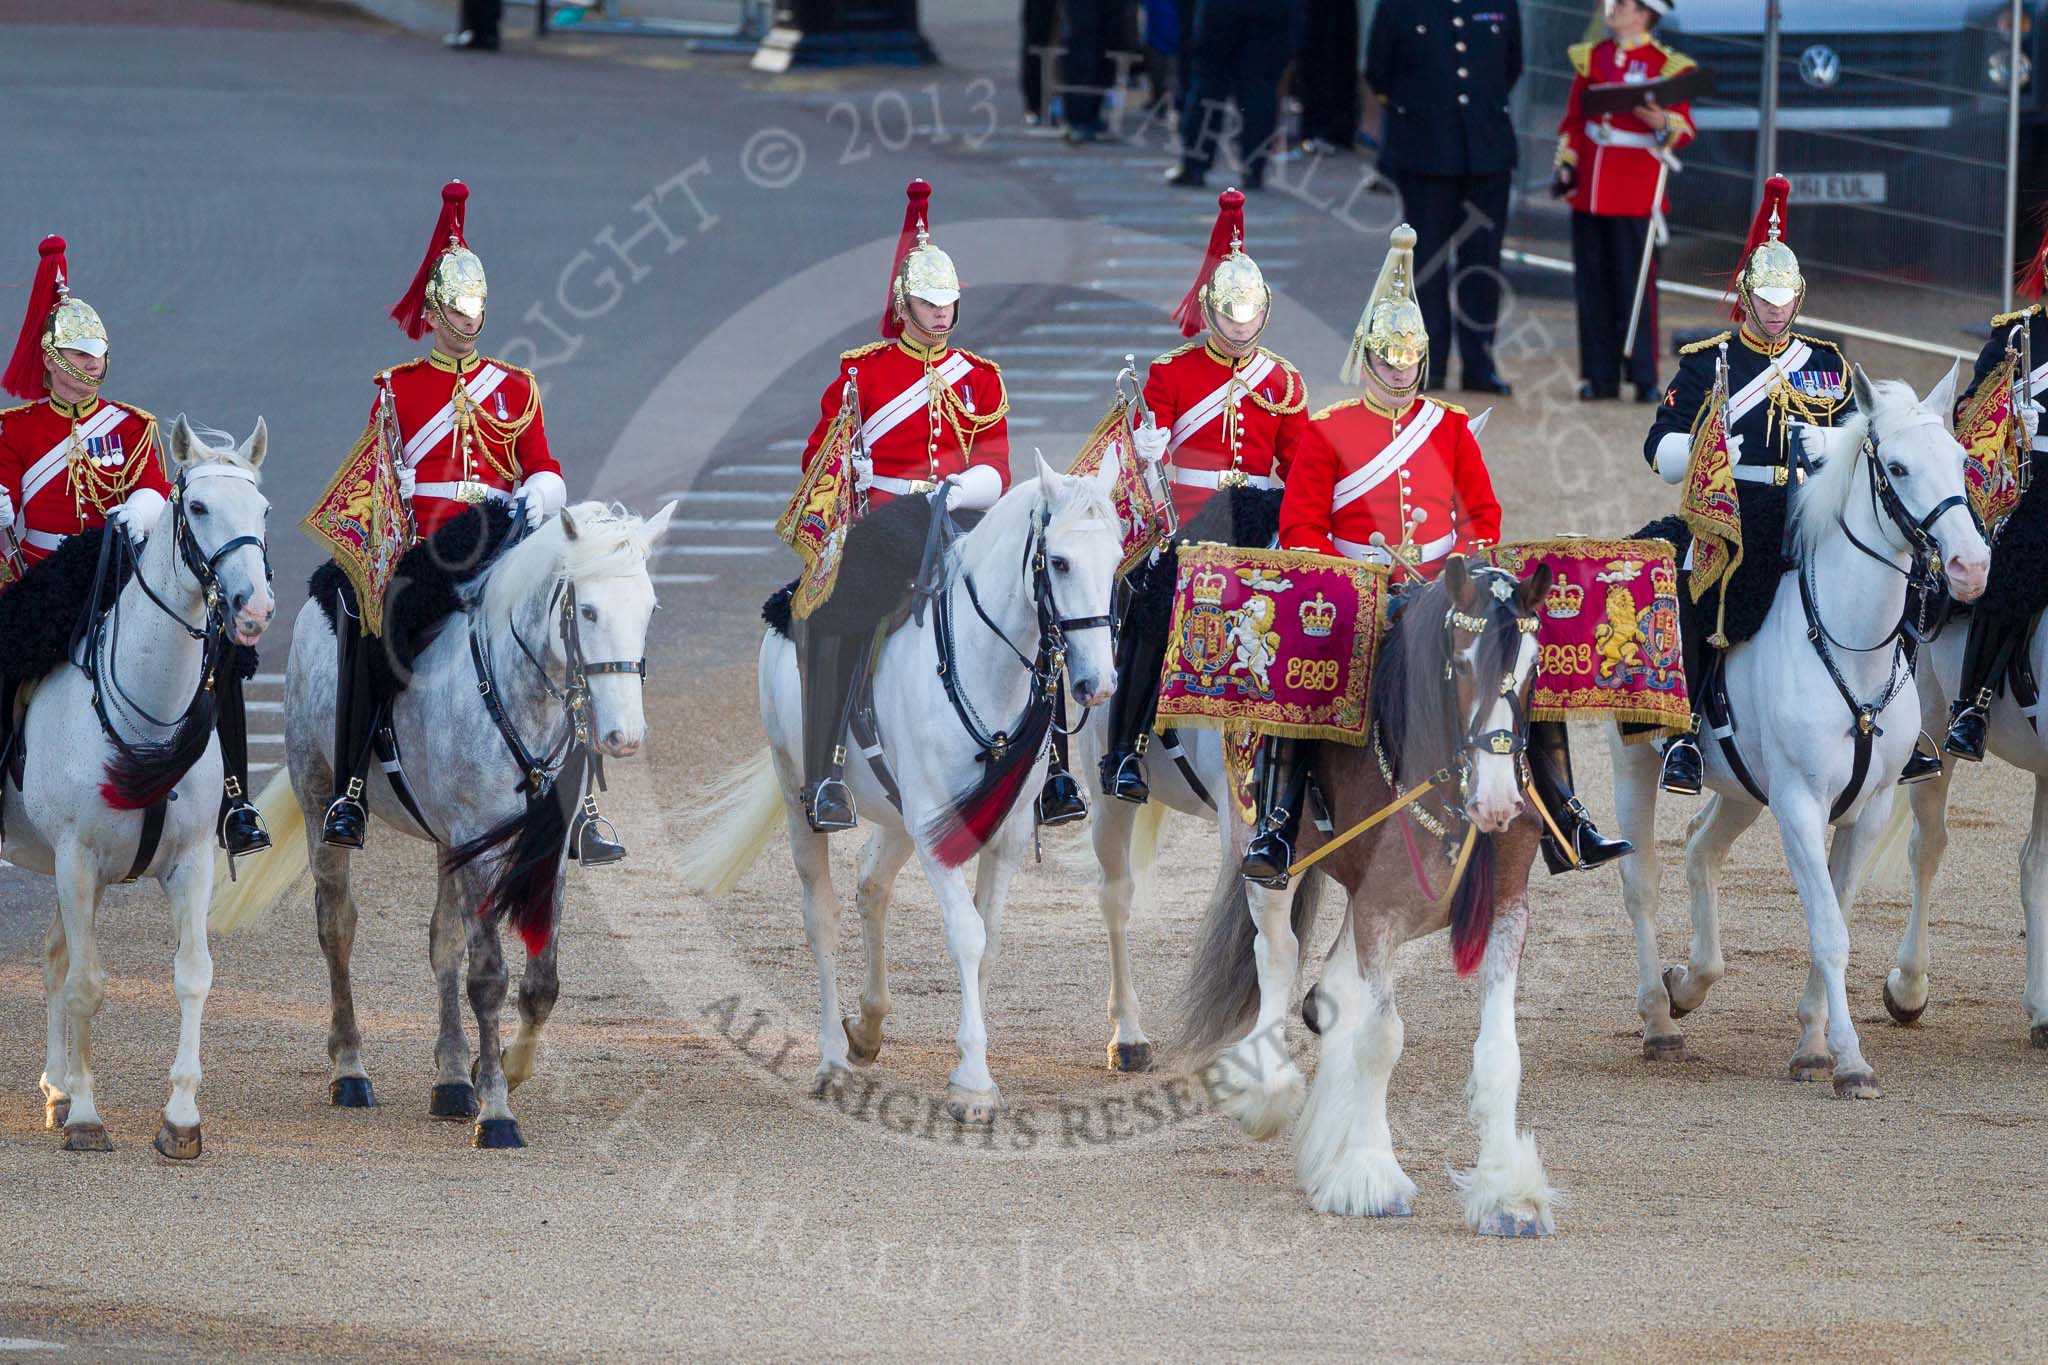 Beating Retreat 2015 - Waterloo 200.
Horse Guards Parade, Westminster,
London,

United Kingdom,
on 10 June 2015 at 20:06, image #78